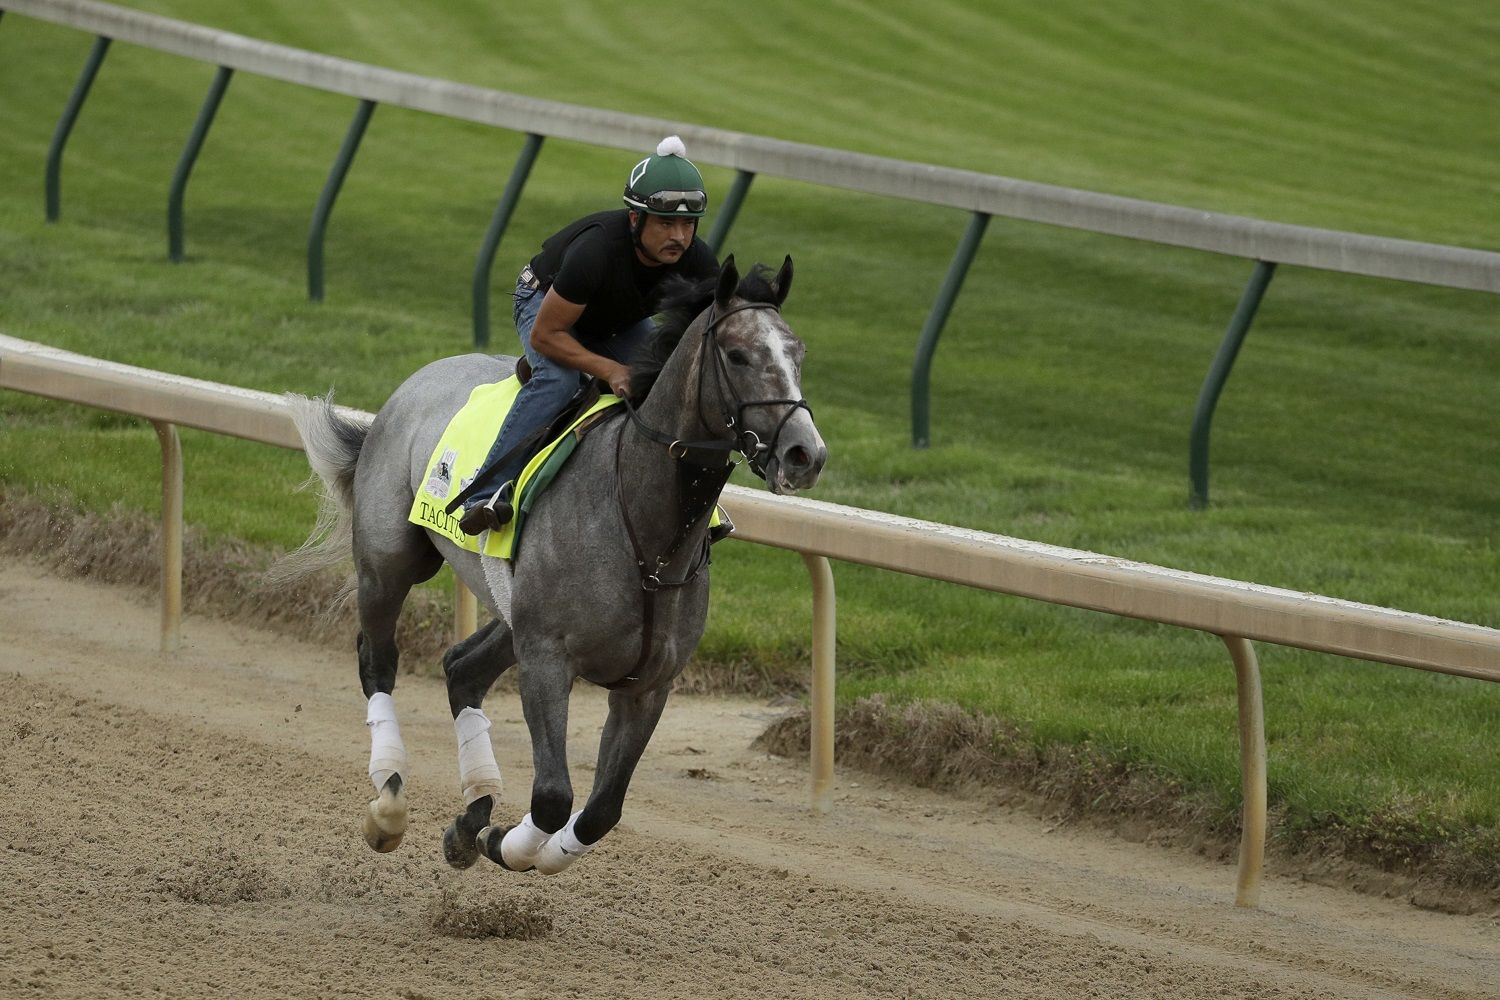 Kentucky Derby entrant Tacitus is ridden on the track during a workout at Churchill Downs Wednesday, May 1, 2019, in Louisville, Ky. The 145th running of the Kentucky Derby is scheduled for Saturday, May 4. (AP Photo/Charlie Riedel)